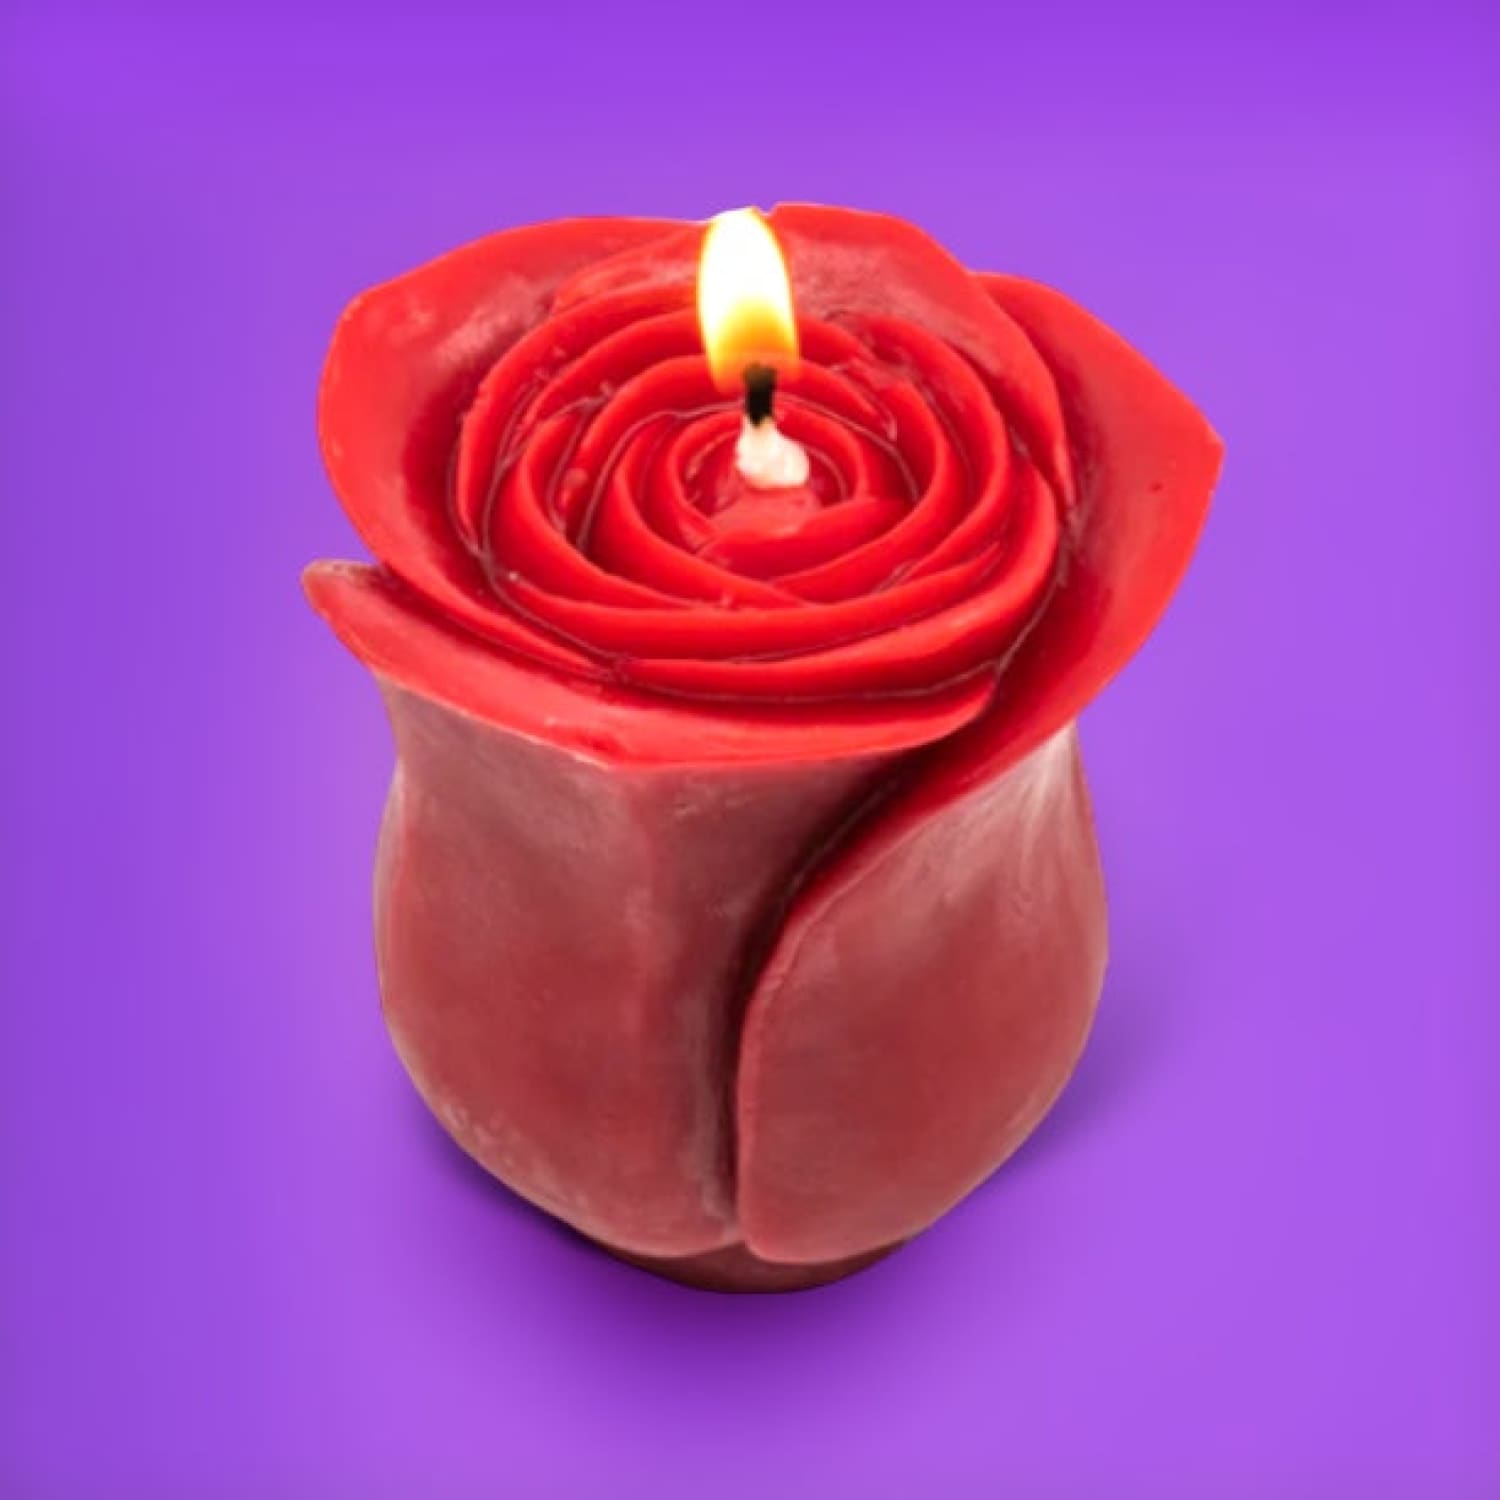 Beeswax Rose Candle Beeswax - Candle - Cotton Wick - Eco